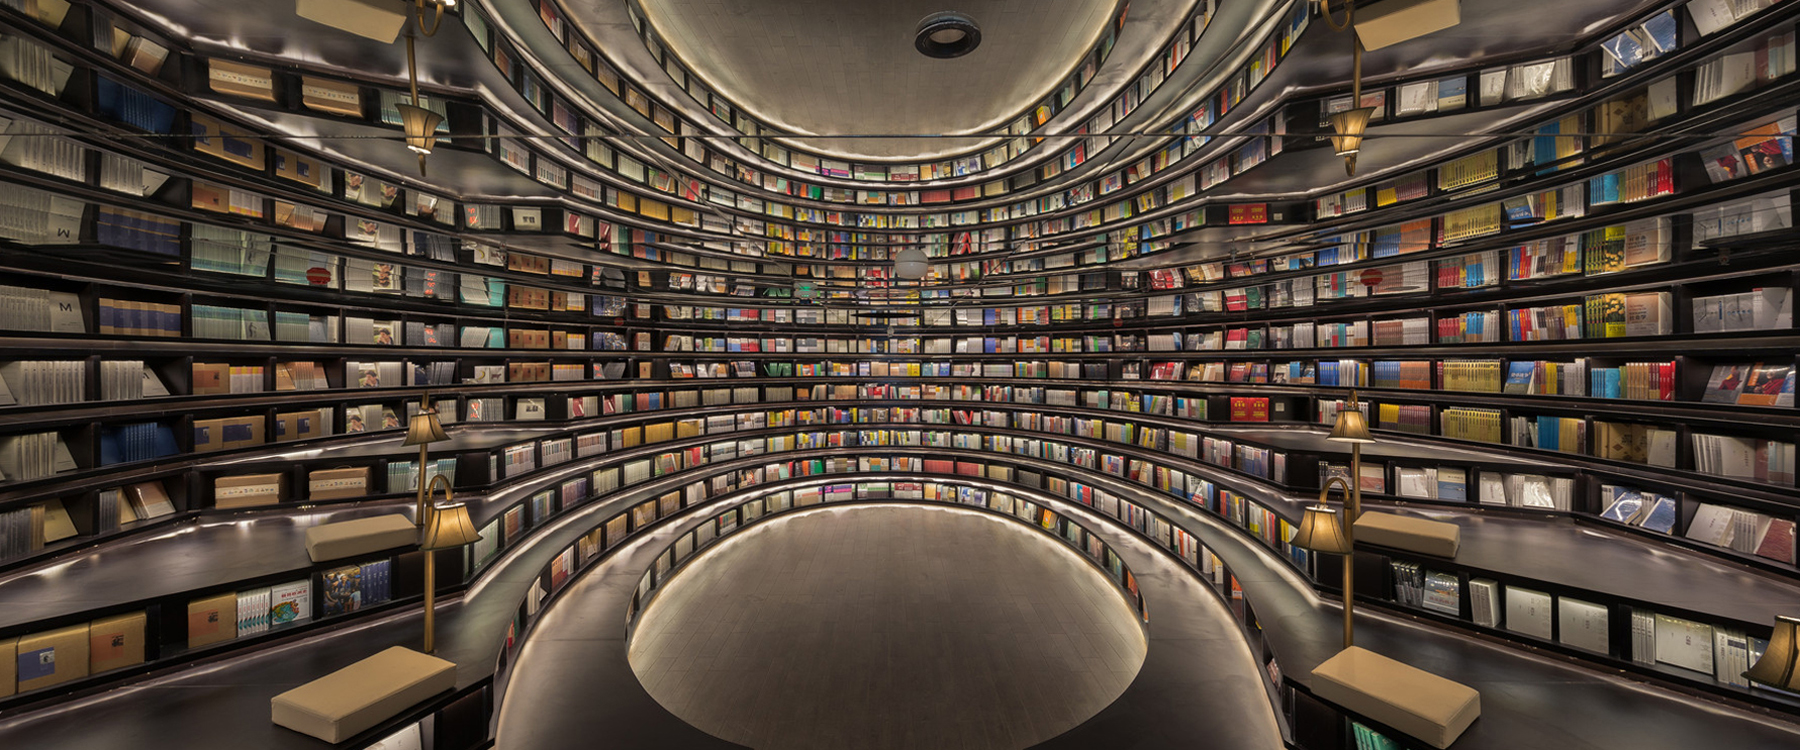 X+living's zhongshuge-hangzhou bookstore in china displays a theatrical reading area